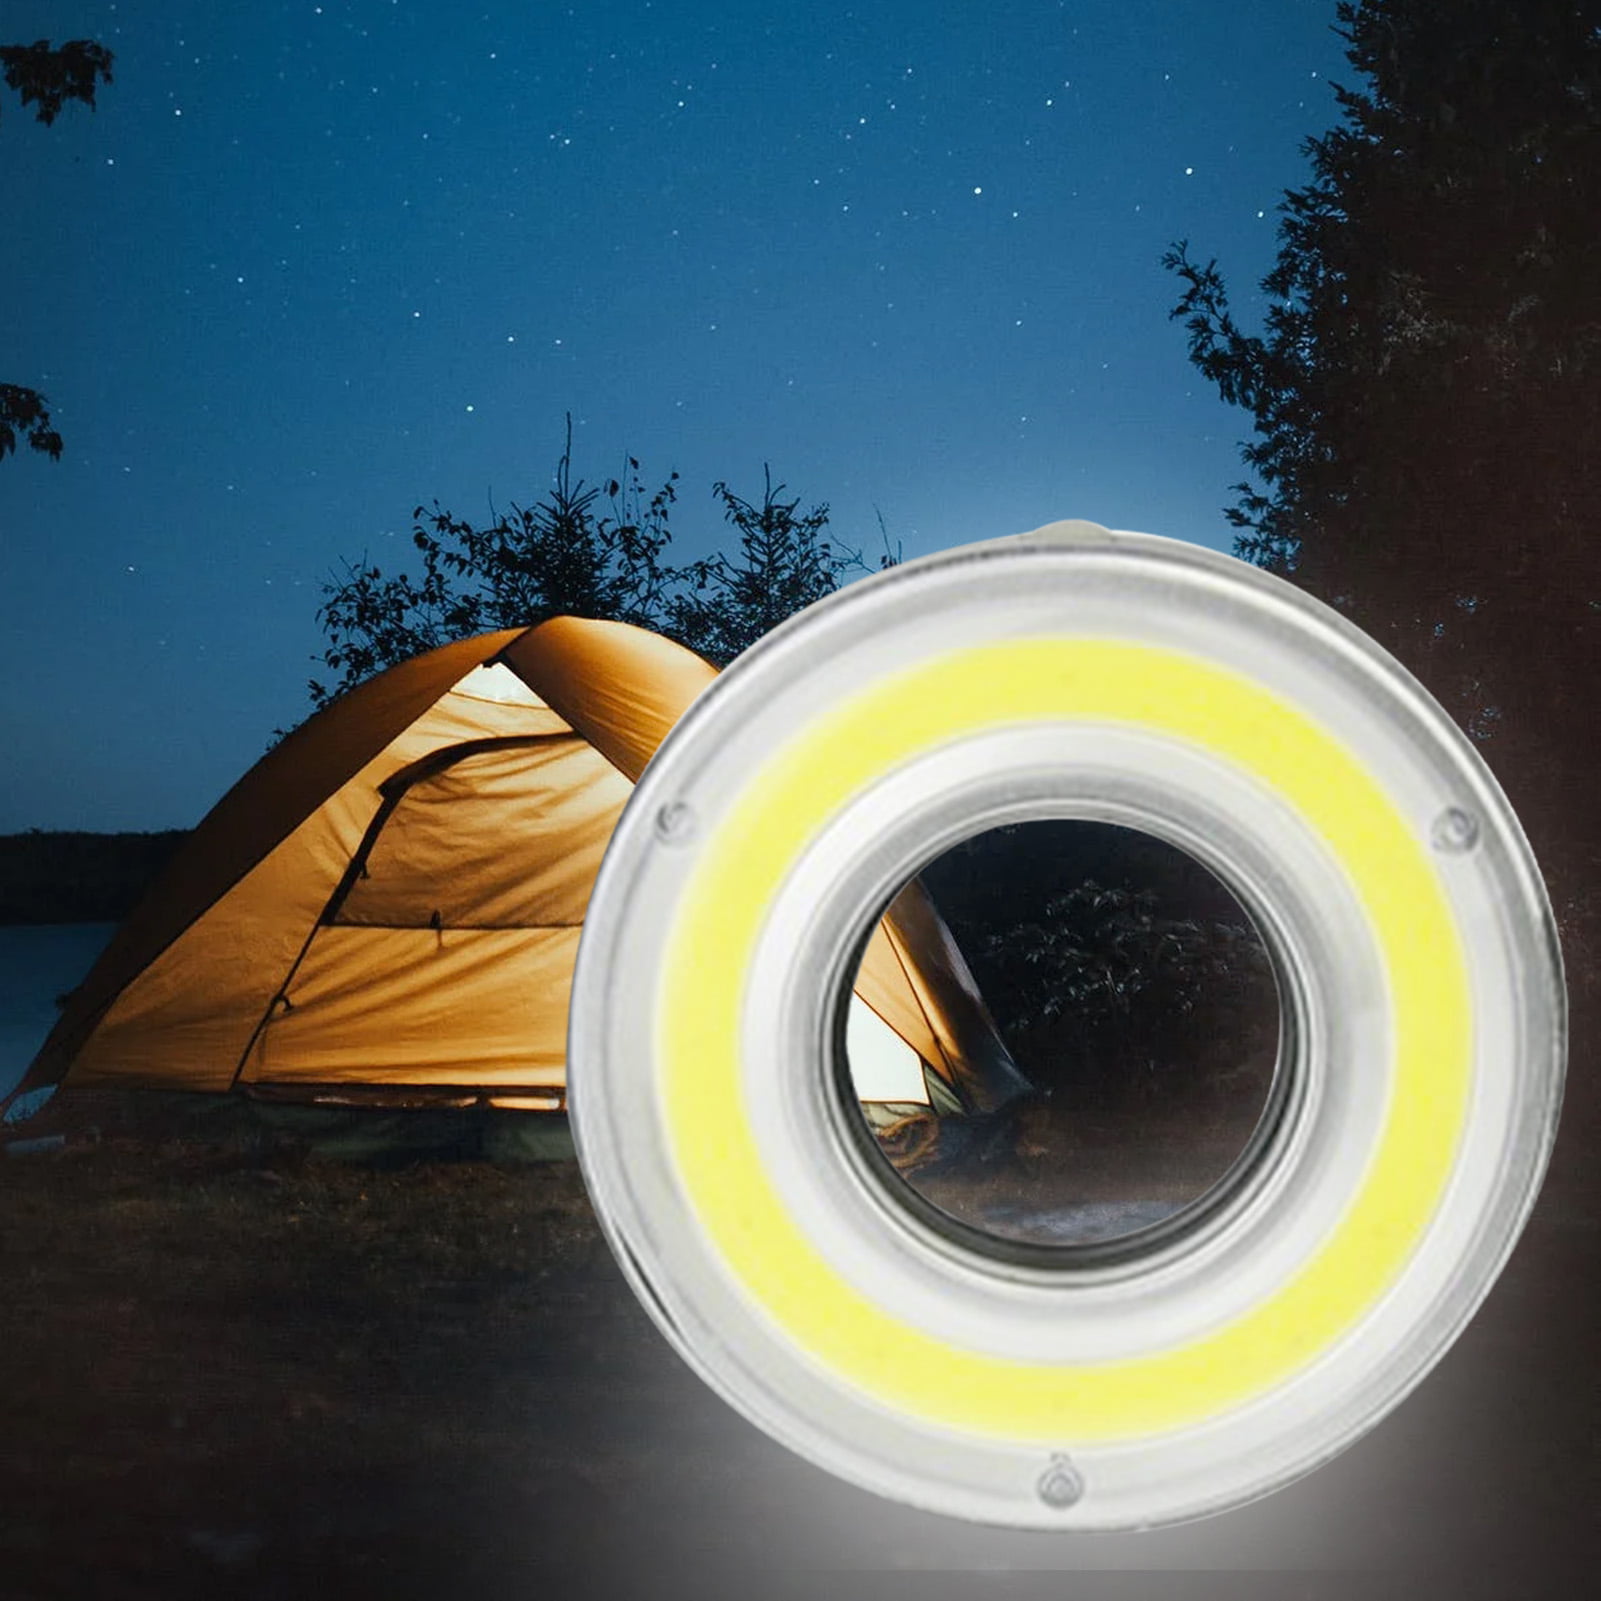 1PC LED Camping Lanterns Battery Powered, Collapsible, IPX4 Water